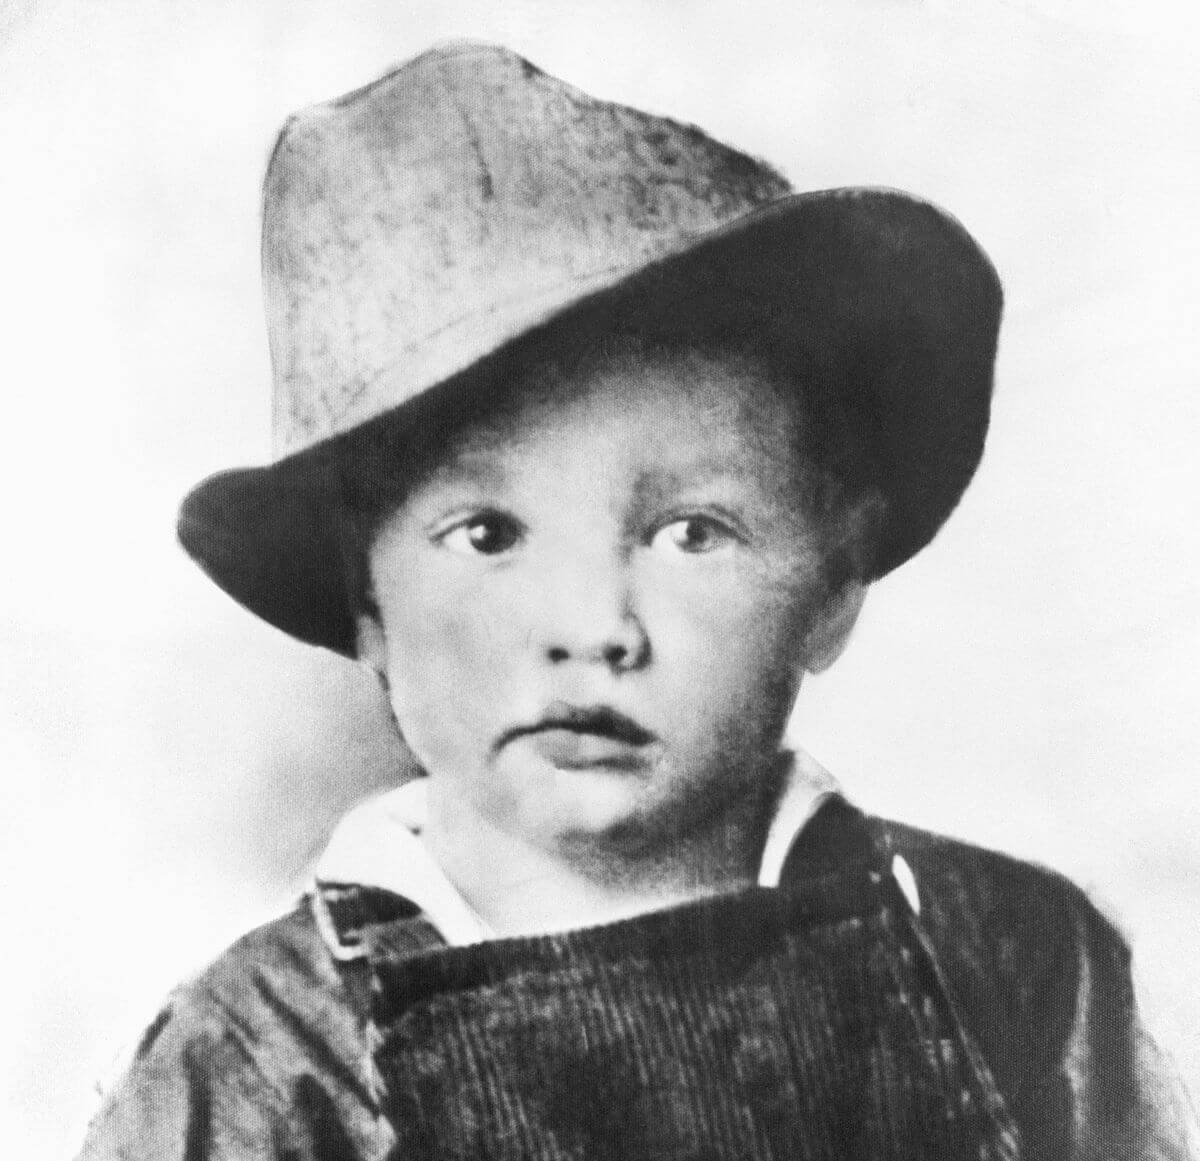 A black and white picture of a three-year-old Elvis Presley wearing a hat.